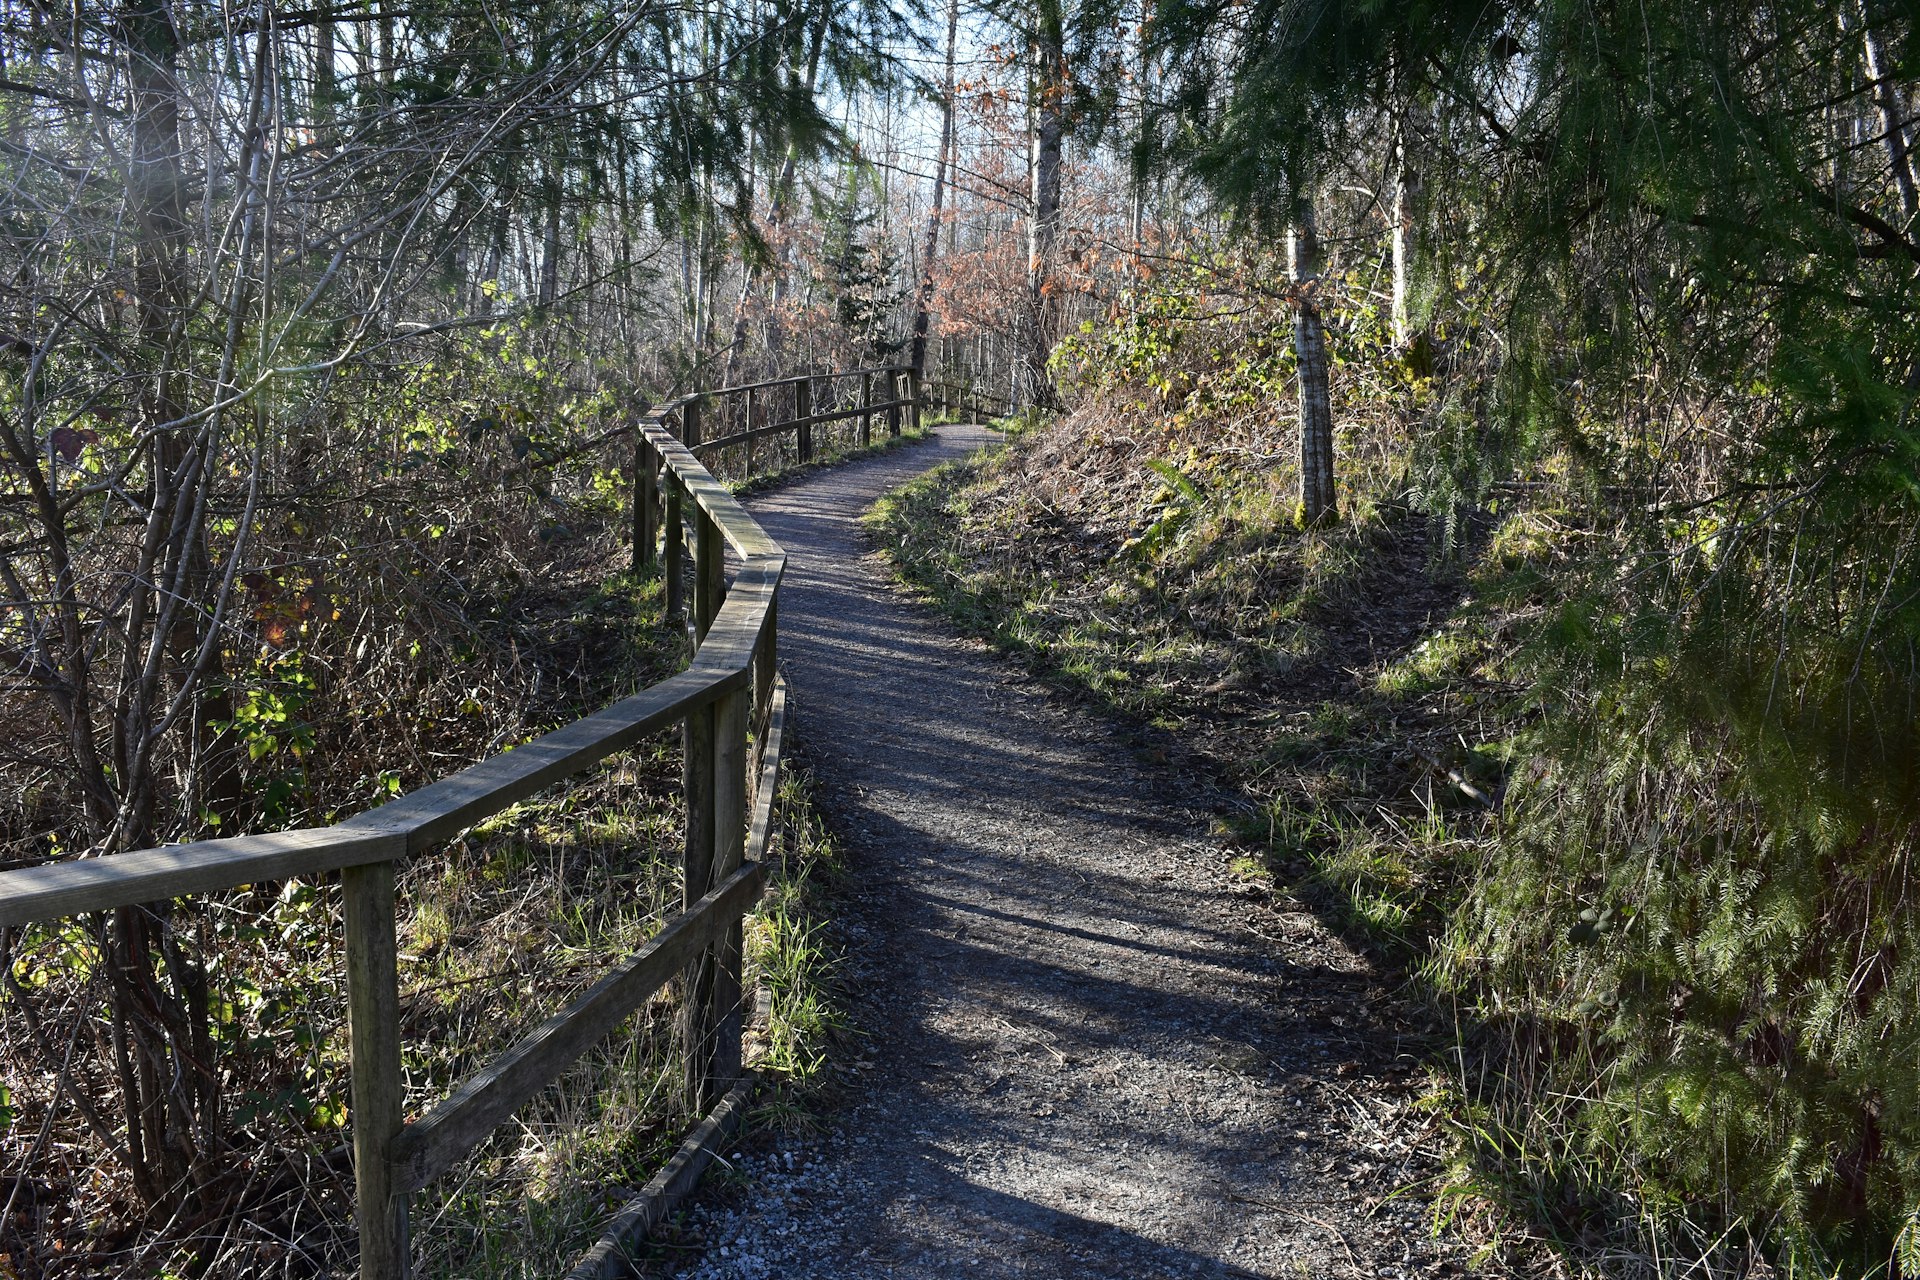 Walking trail through Maplewood Flats Conservation Area in Vancouver, Canada